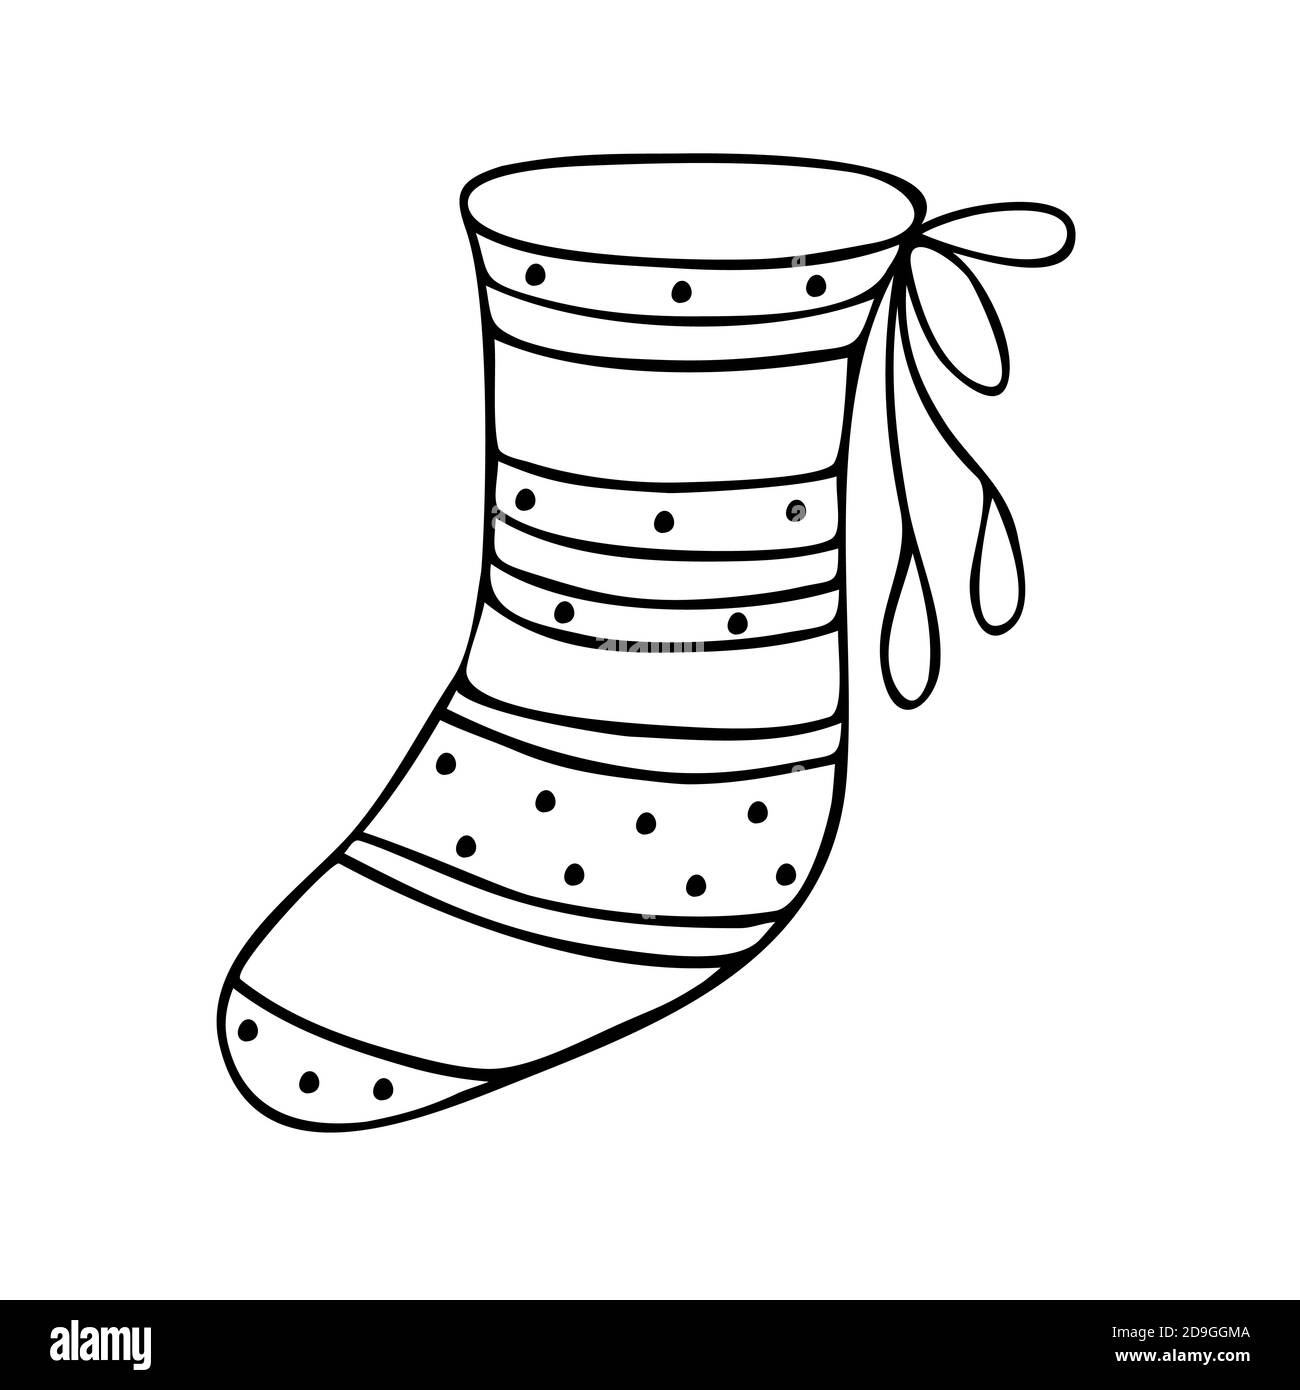 Christmas stocking simple hand drawn in doodle style vector outline ...